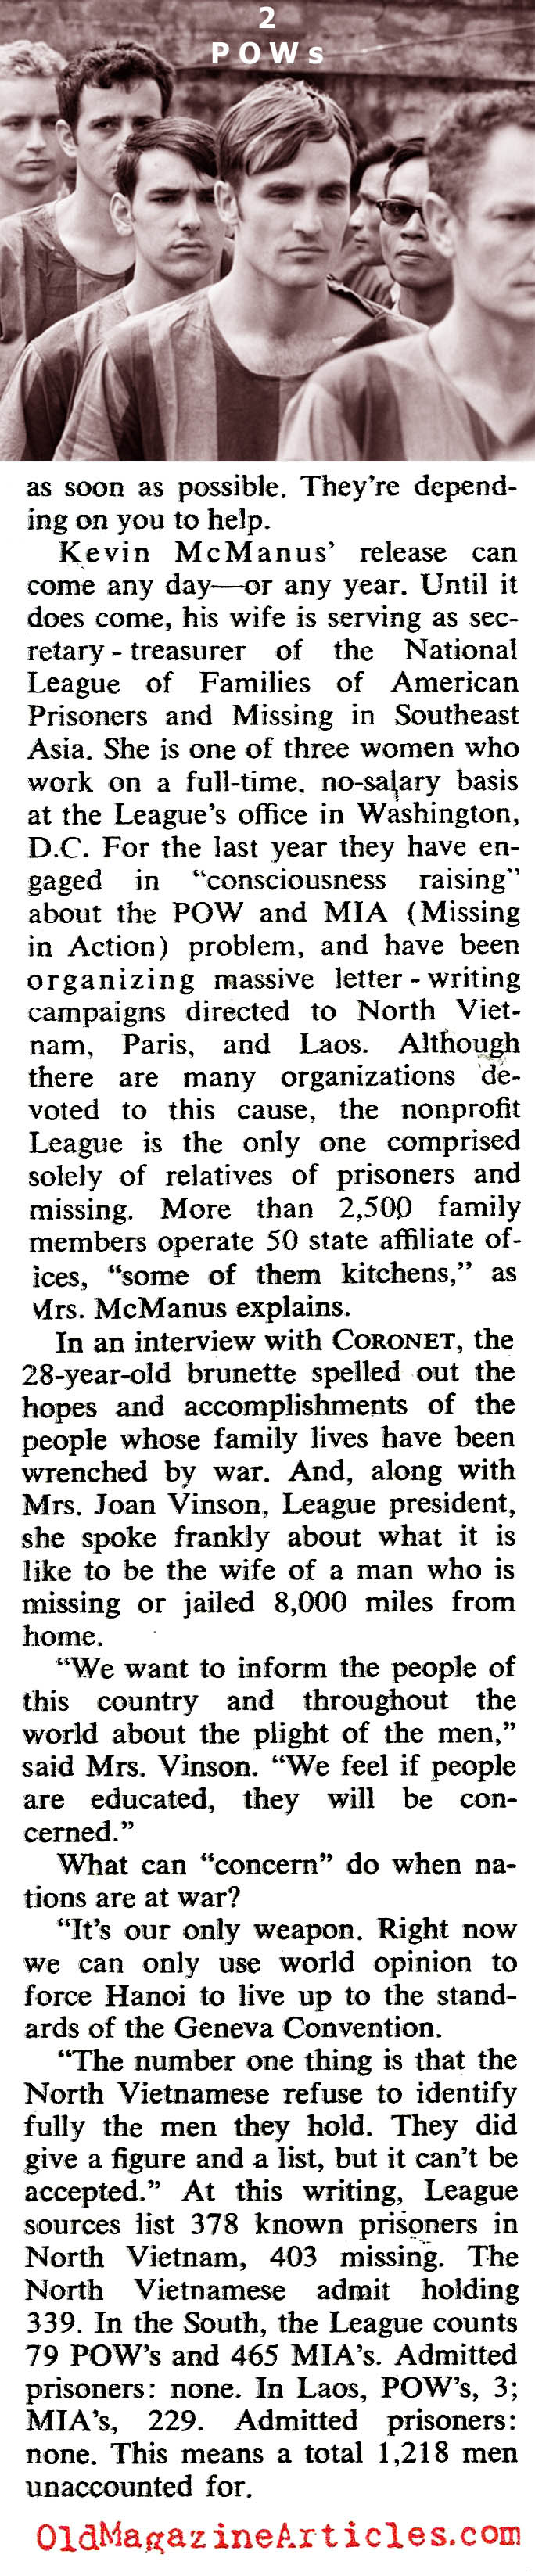 American POWs and the Wives They Left Behind (Coronet Magazine, 1971)